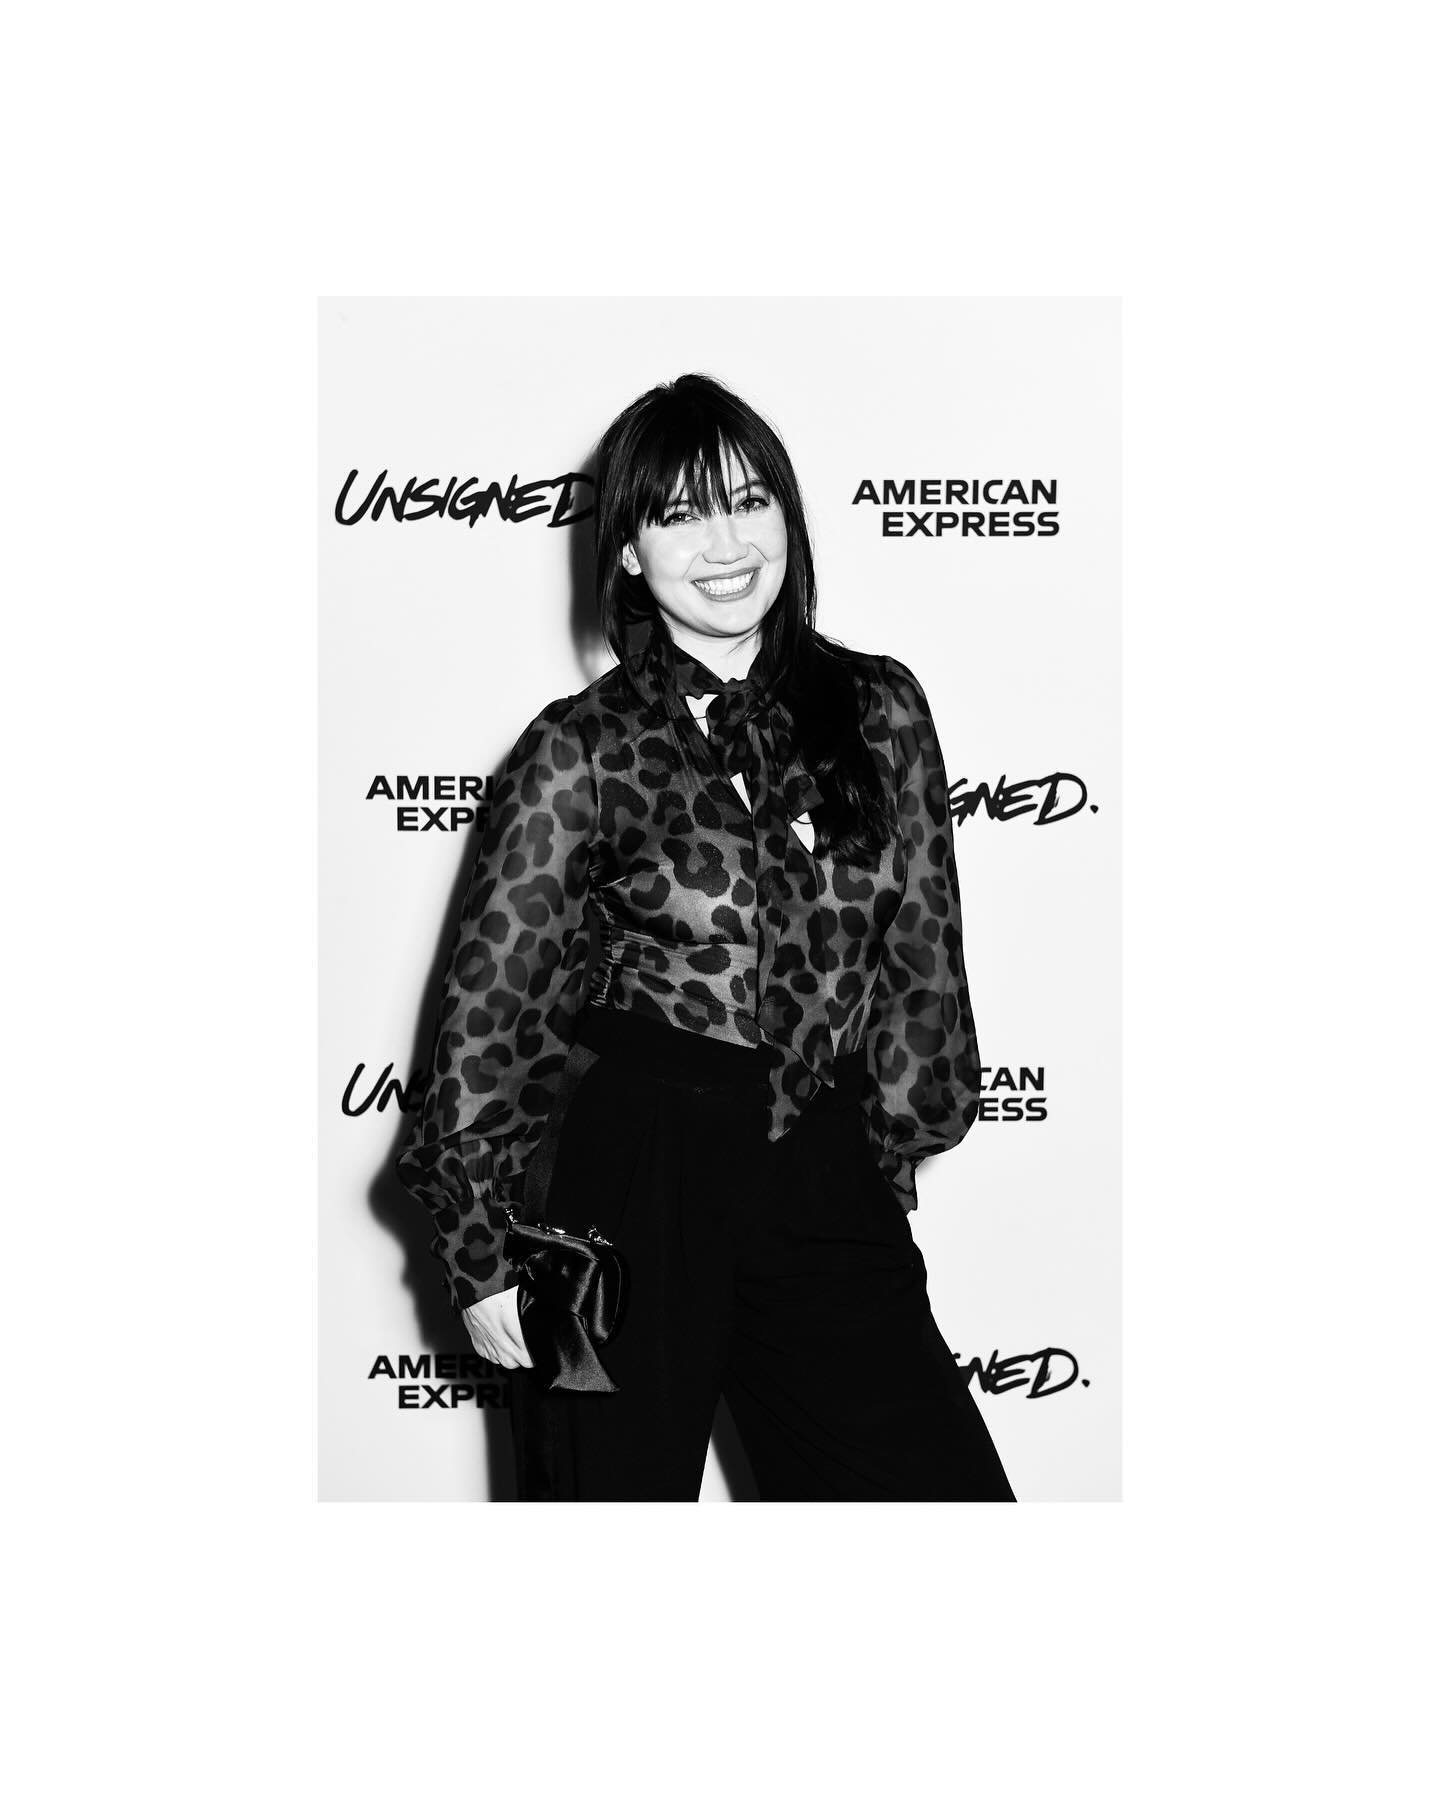 @daisylowe at The @americanexpressuk Gold Unsigned on November 30th Showcase. Amex Gold Unsigned is an initiative to support unsigned, emerging musical artists and grassroots venues. #kendalandpartners